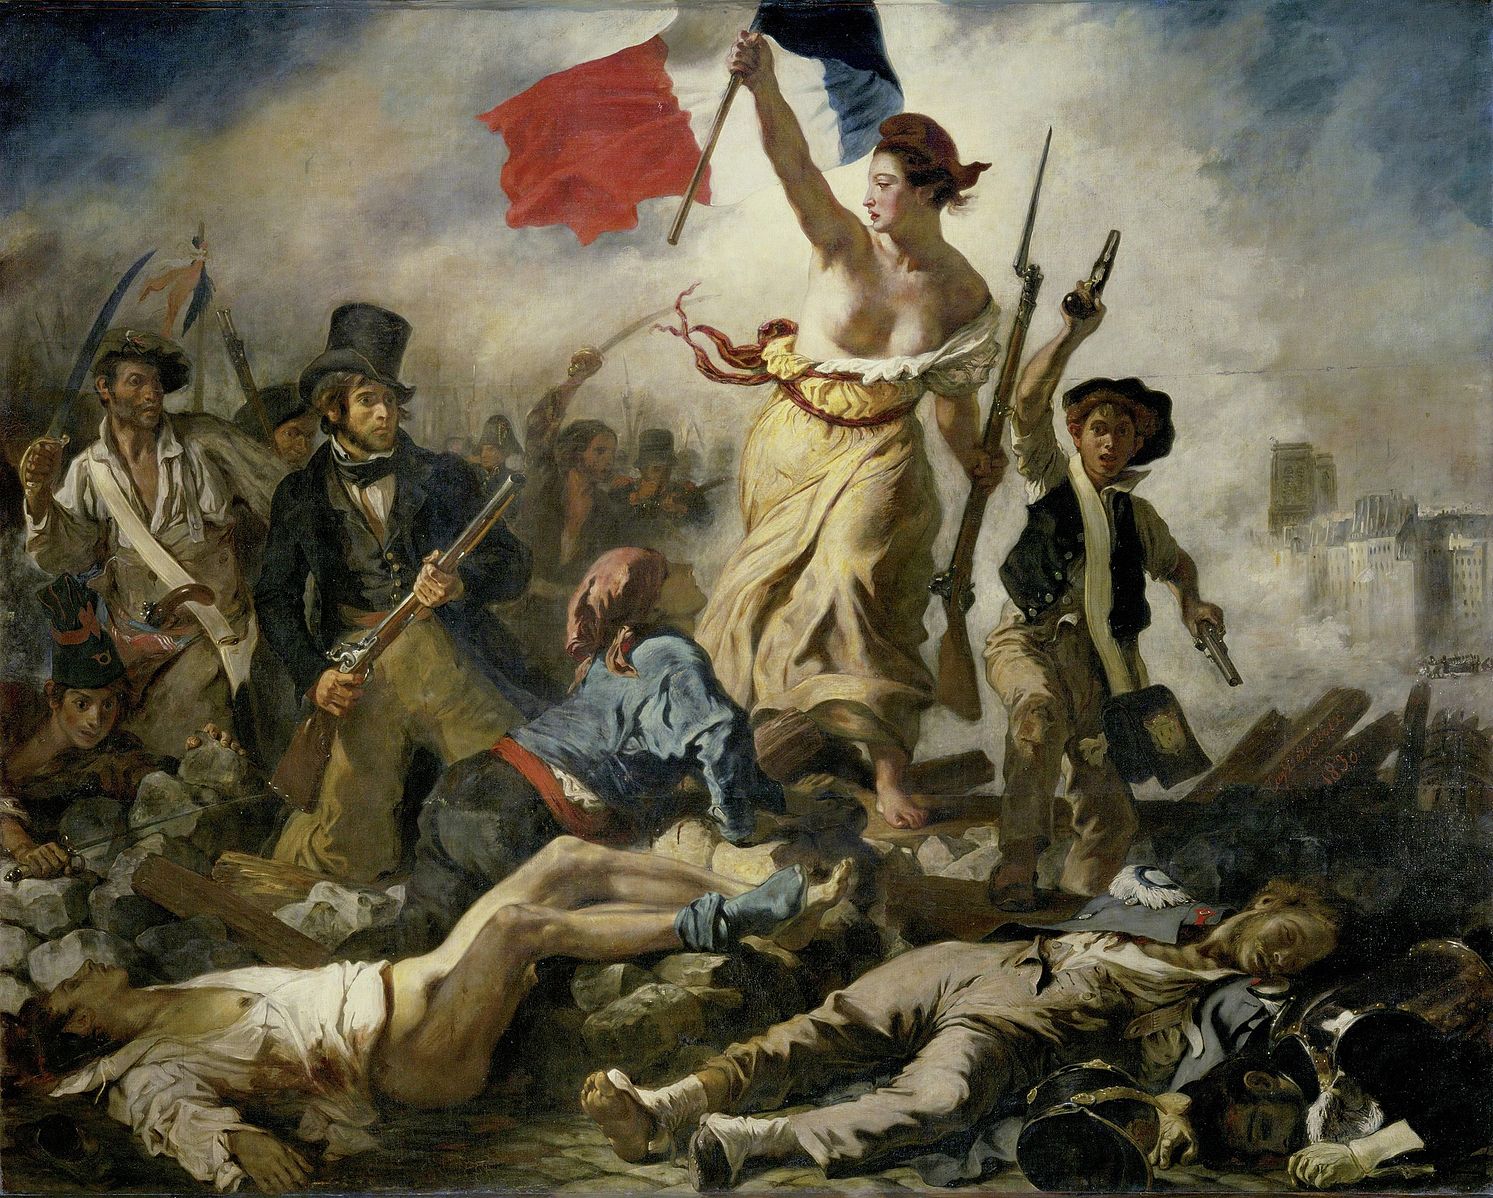 A half nude woman carrying the French flag leads the soldiers to victory